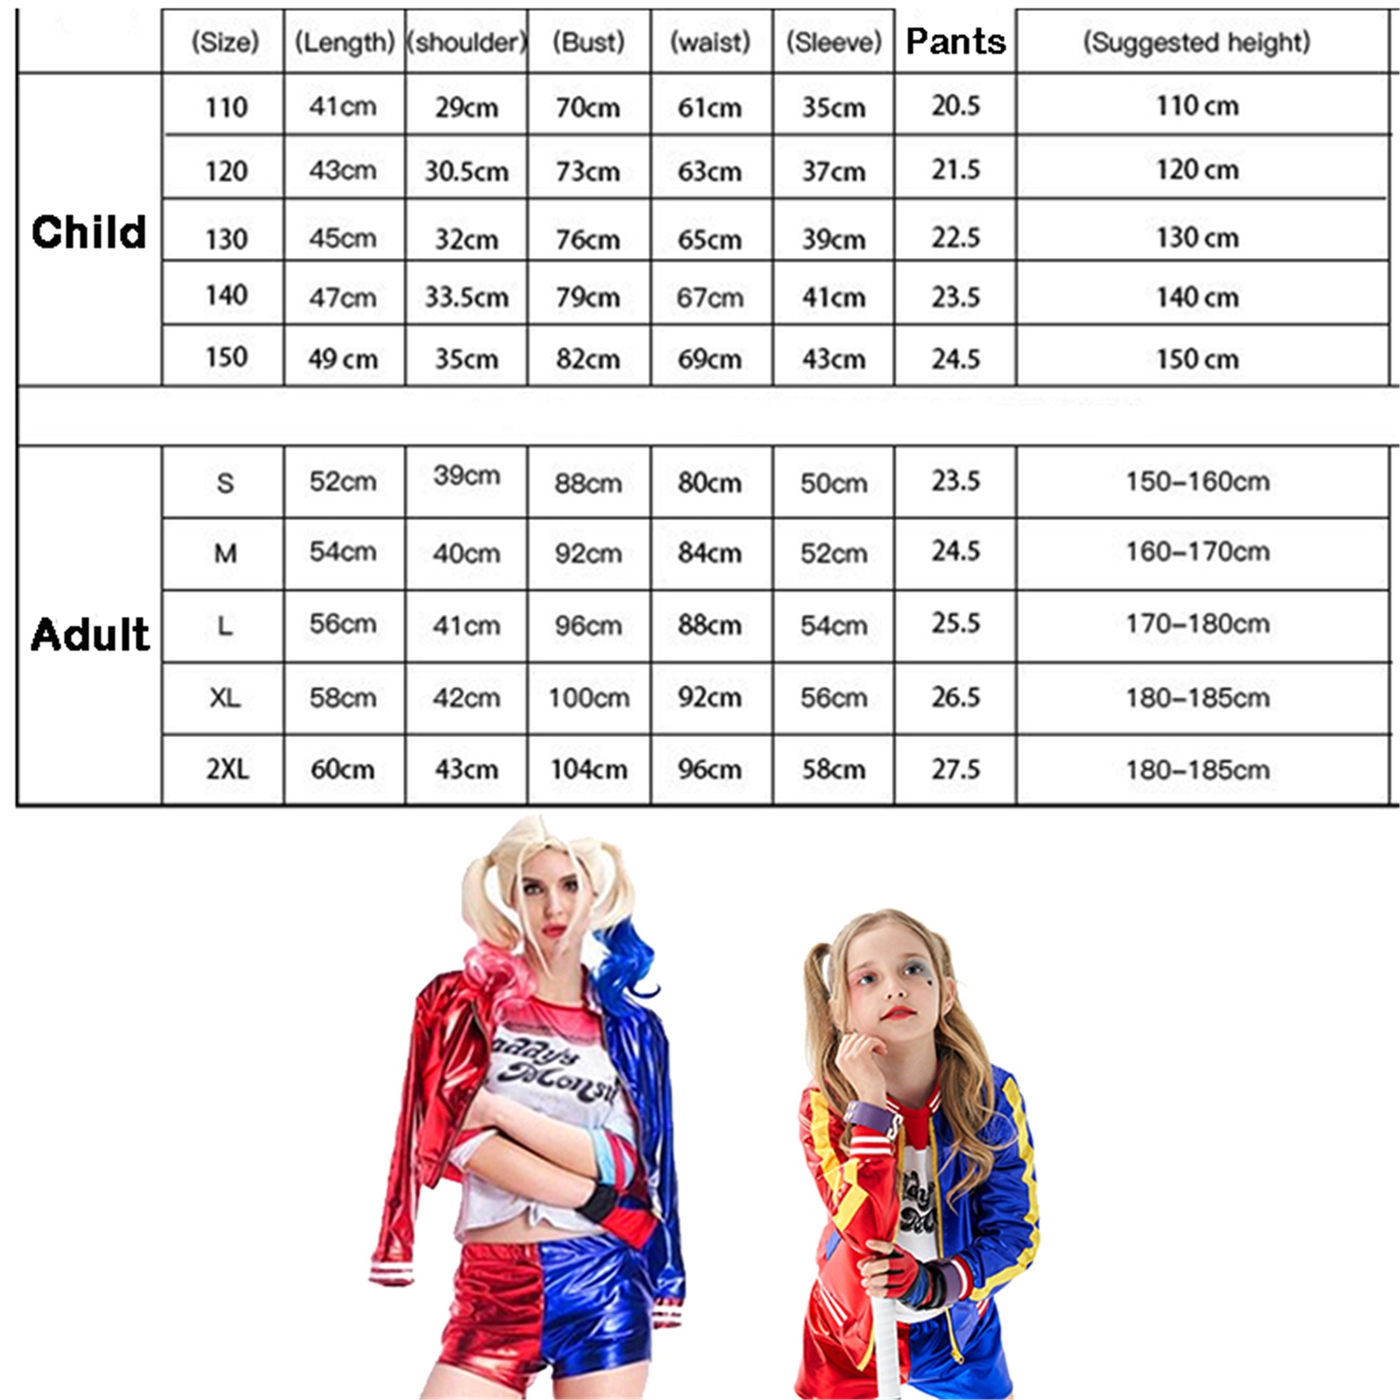 Harley Quinn sexy costumes adult and child size